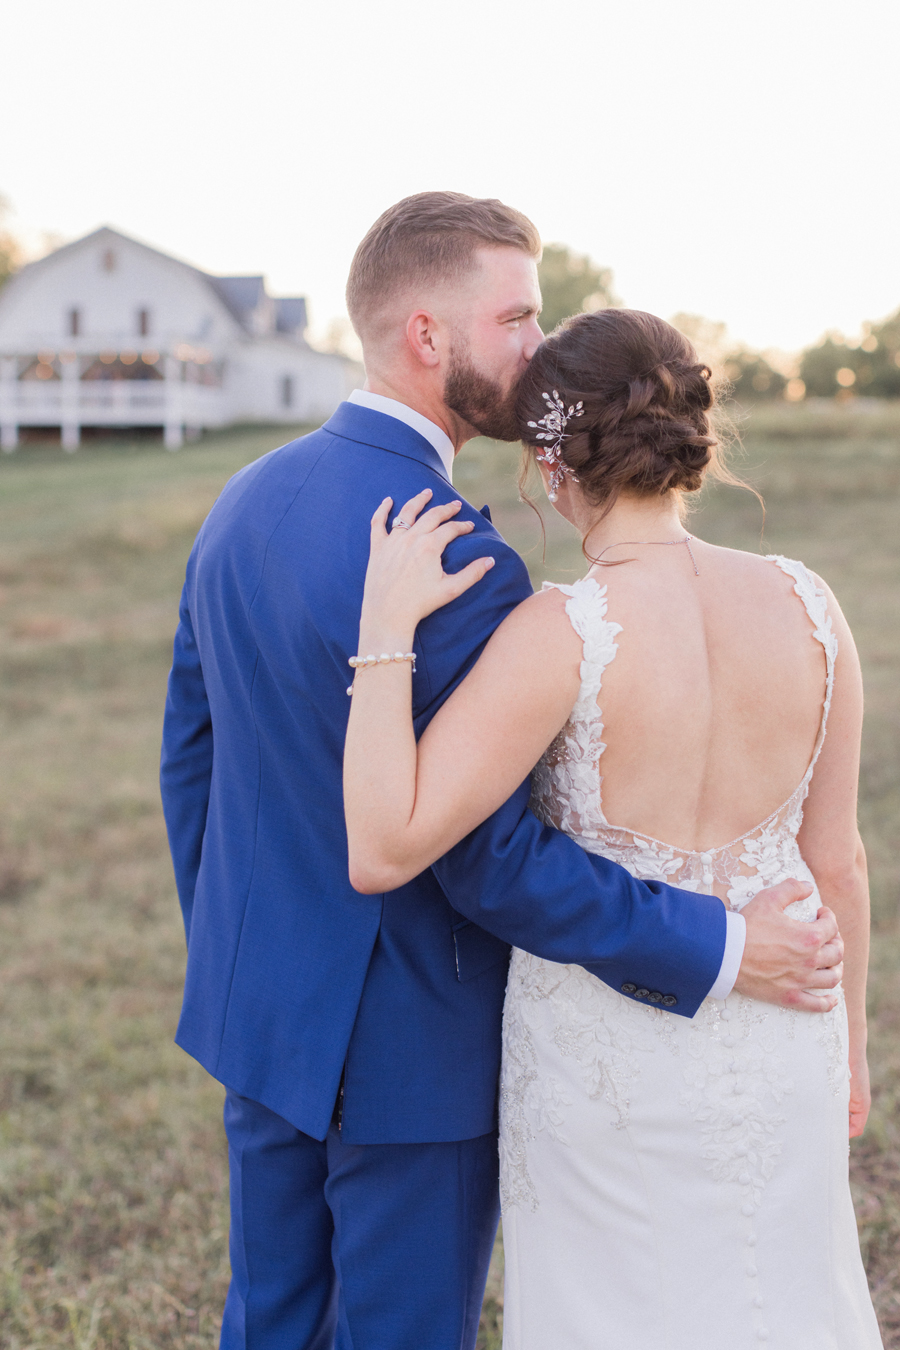 Sunset photos with the bride and groom at their Blue Bell Farm wedding by Missouri wedding photographer Love Tree Studios.